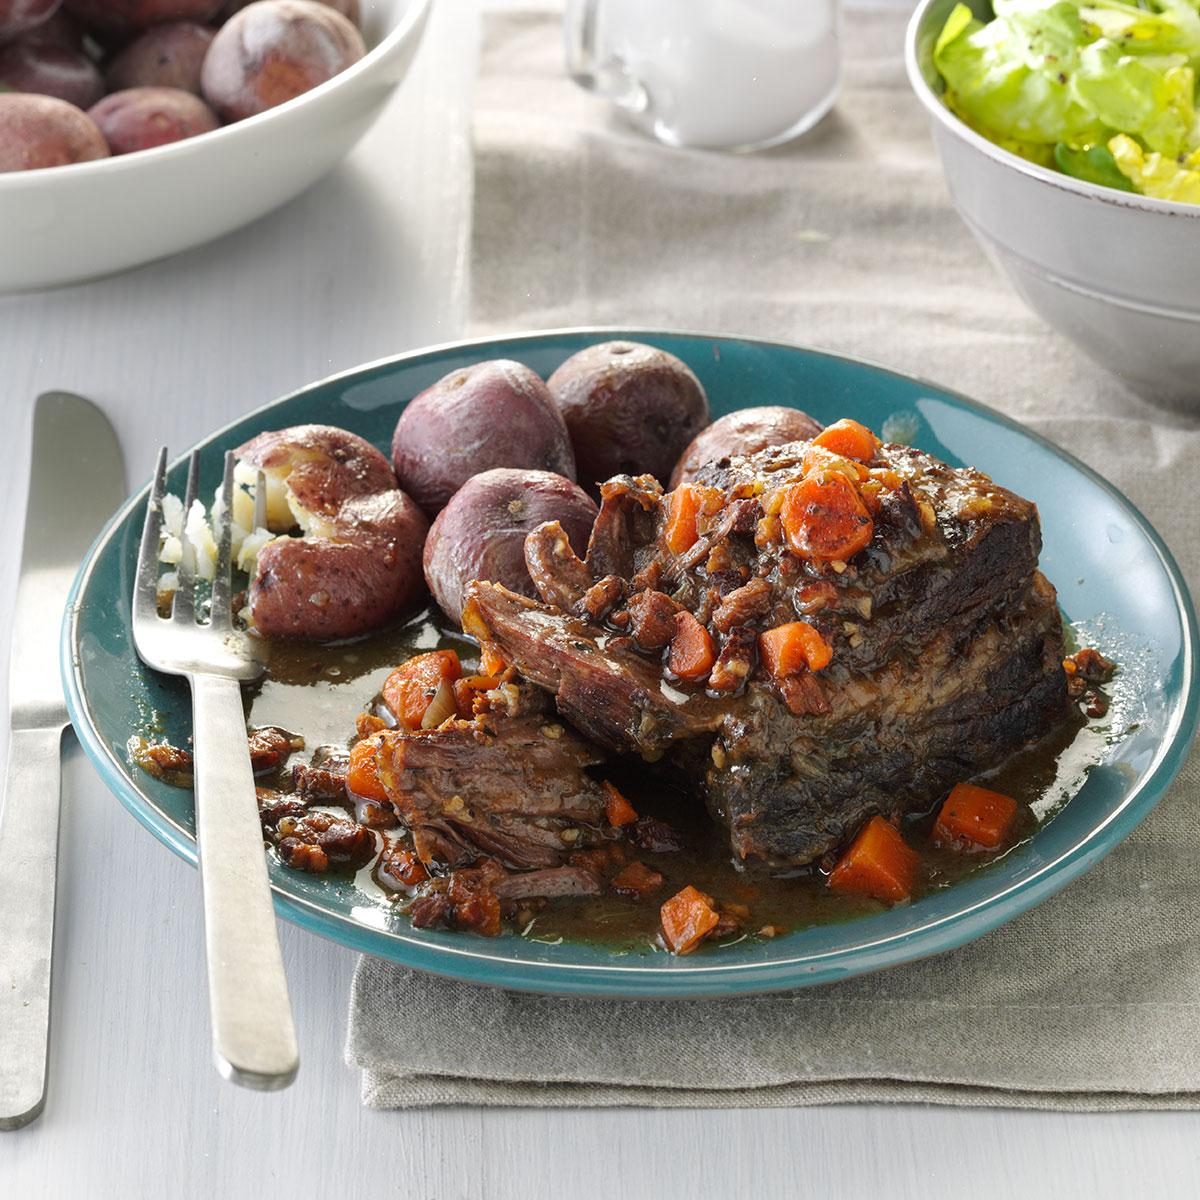 Connecticut: Slow-Cooked Short Ribs with Salt-Skin Potatoes